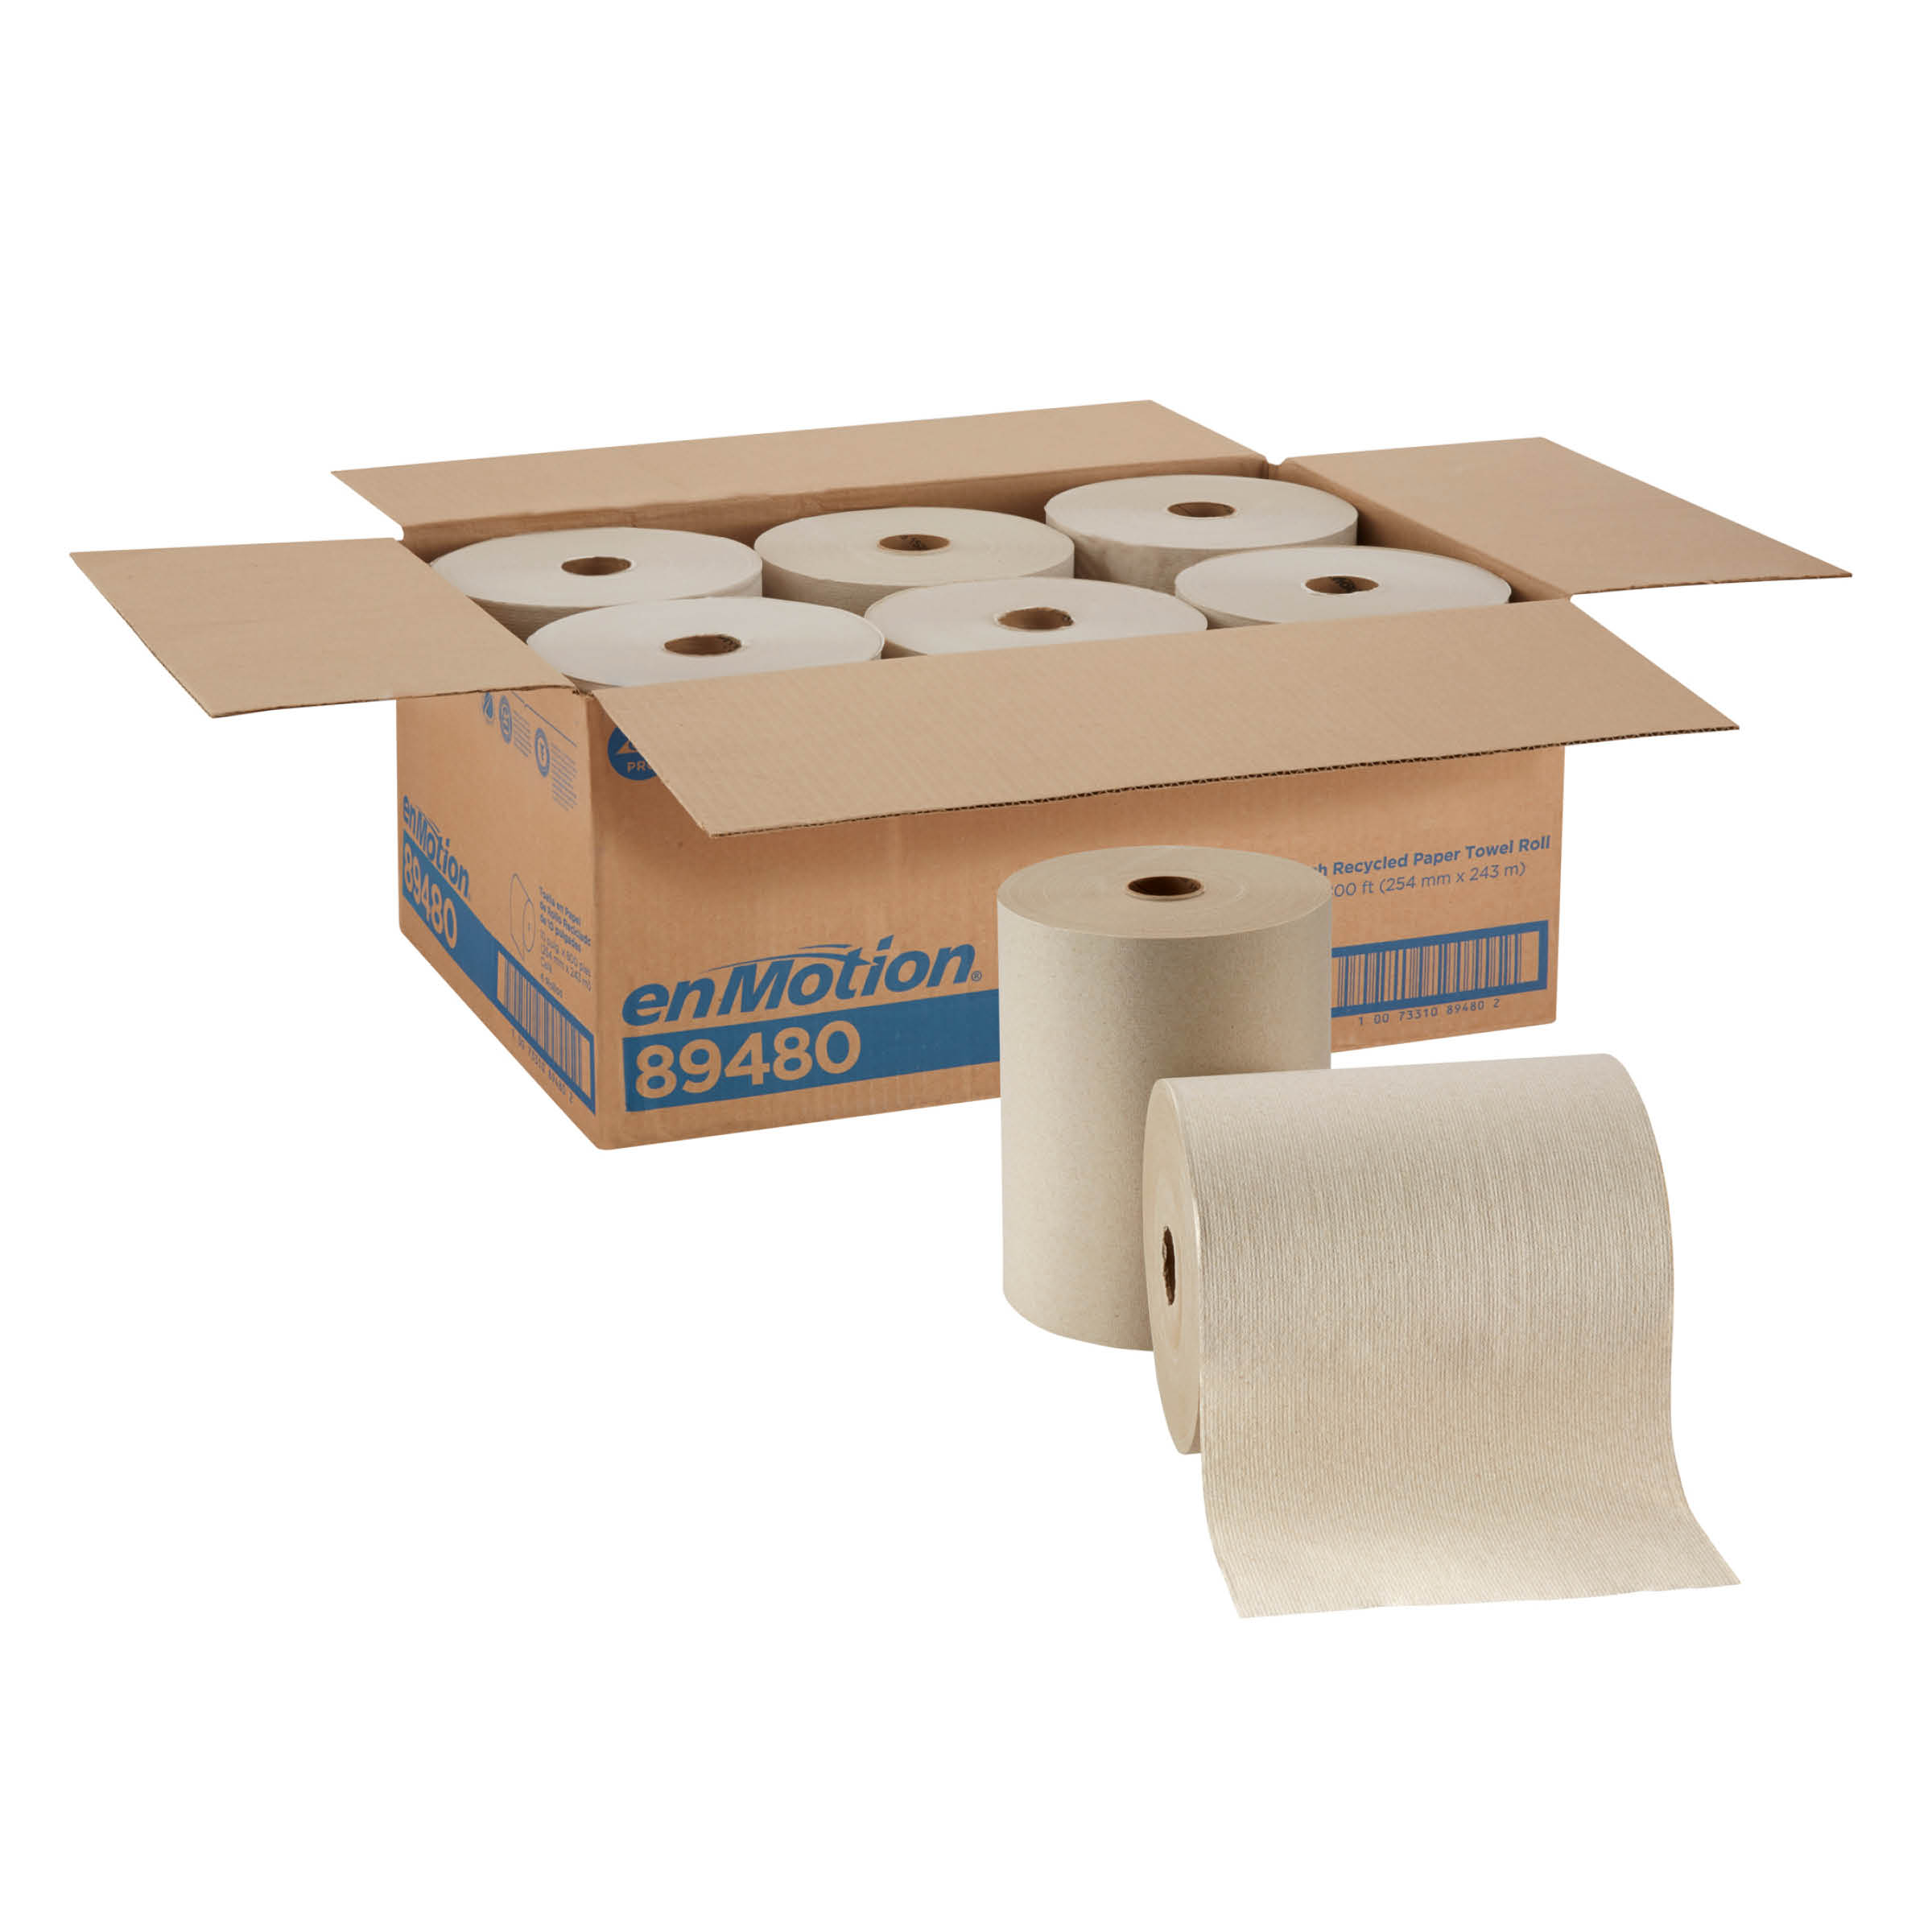 GP PRO enMotion Recycled (3rd Party) Paper Towel Roll, Brown 800' (6 per case)